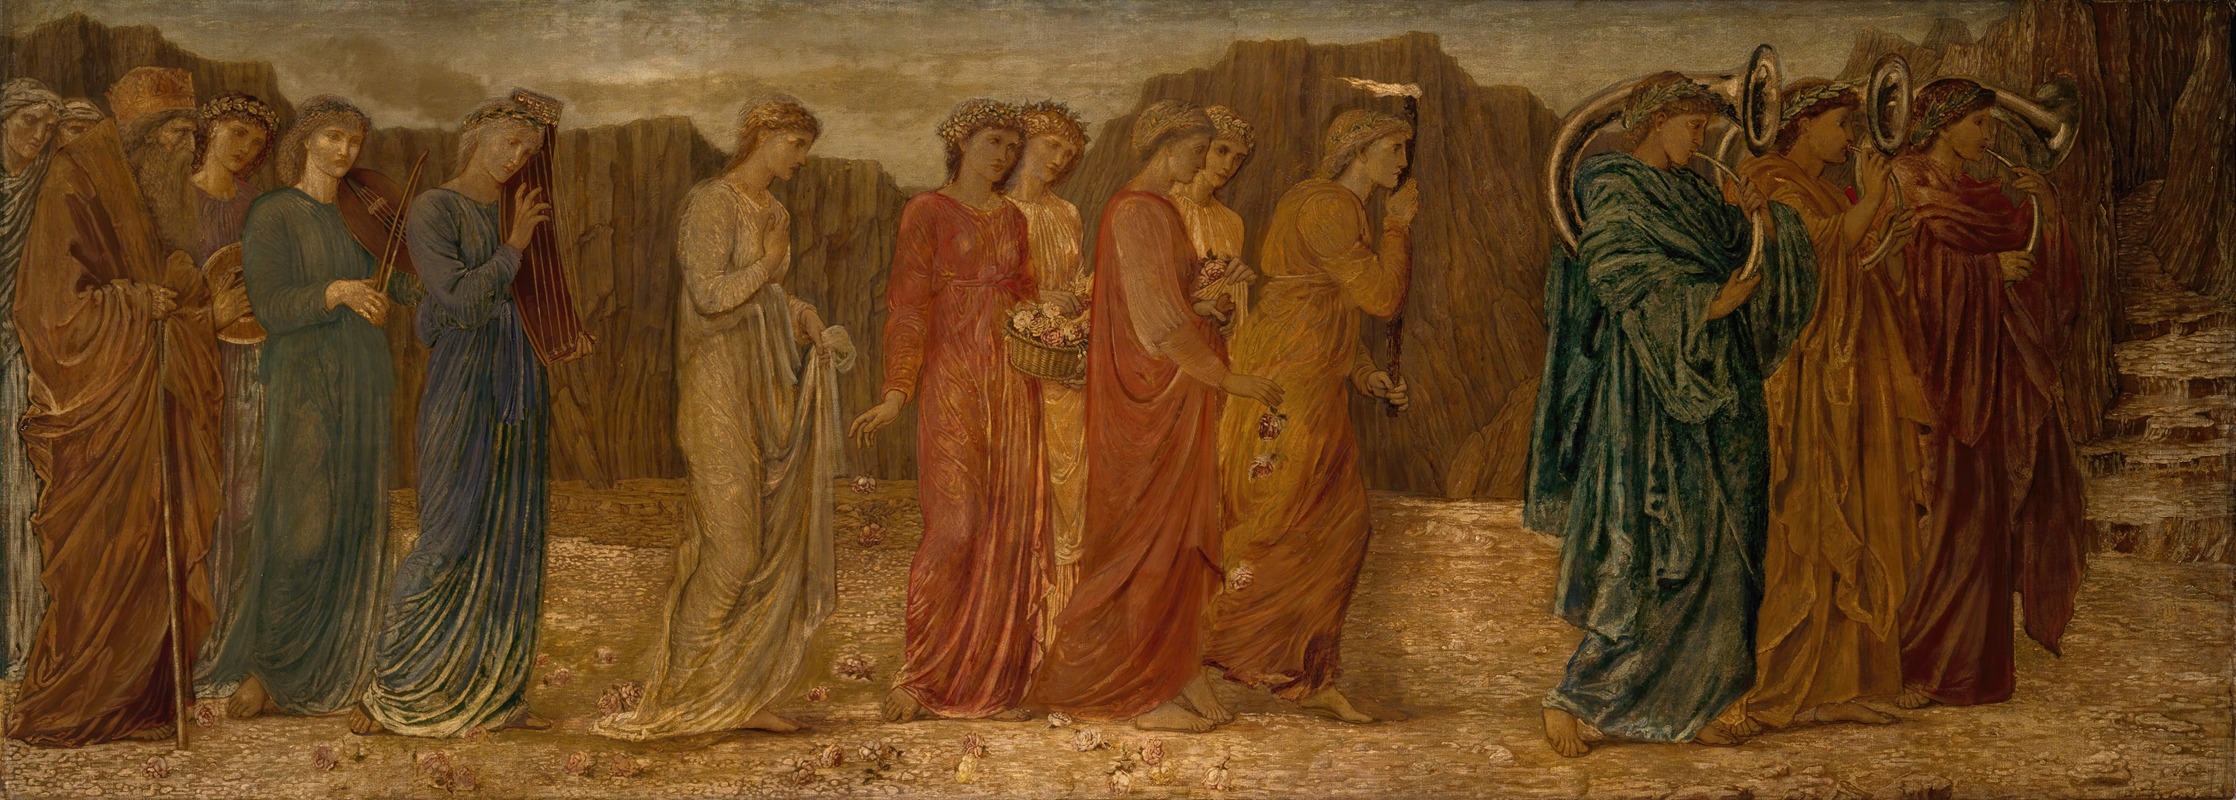 Sir Edward Coley Burne-Jones - The King and other Mourners abandon Psyche to the Monster